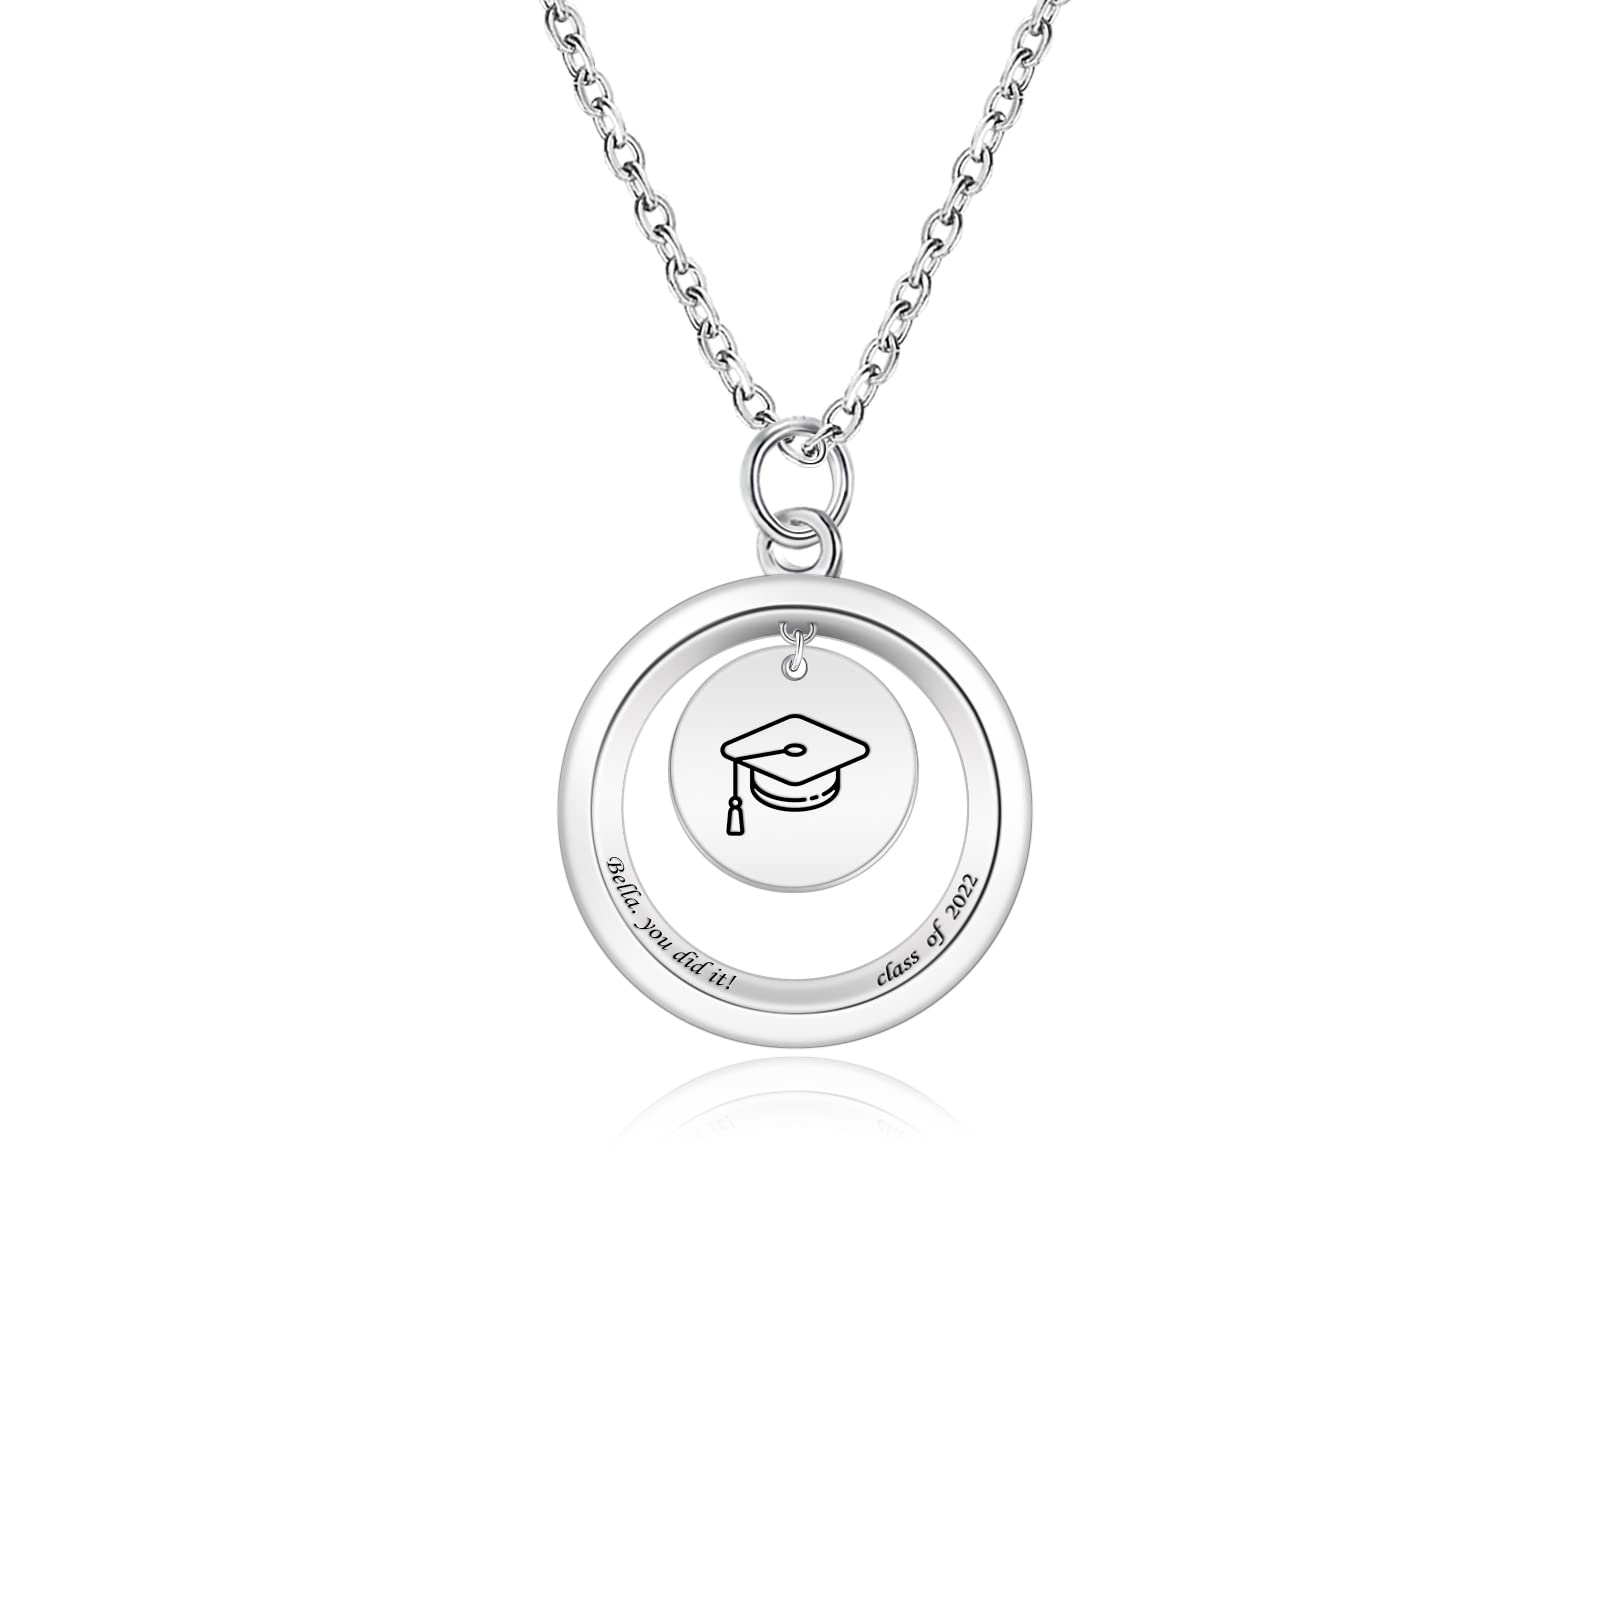 Custom College Graduation Cap Charm Necklace for Her